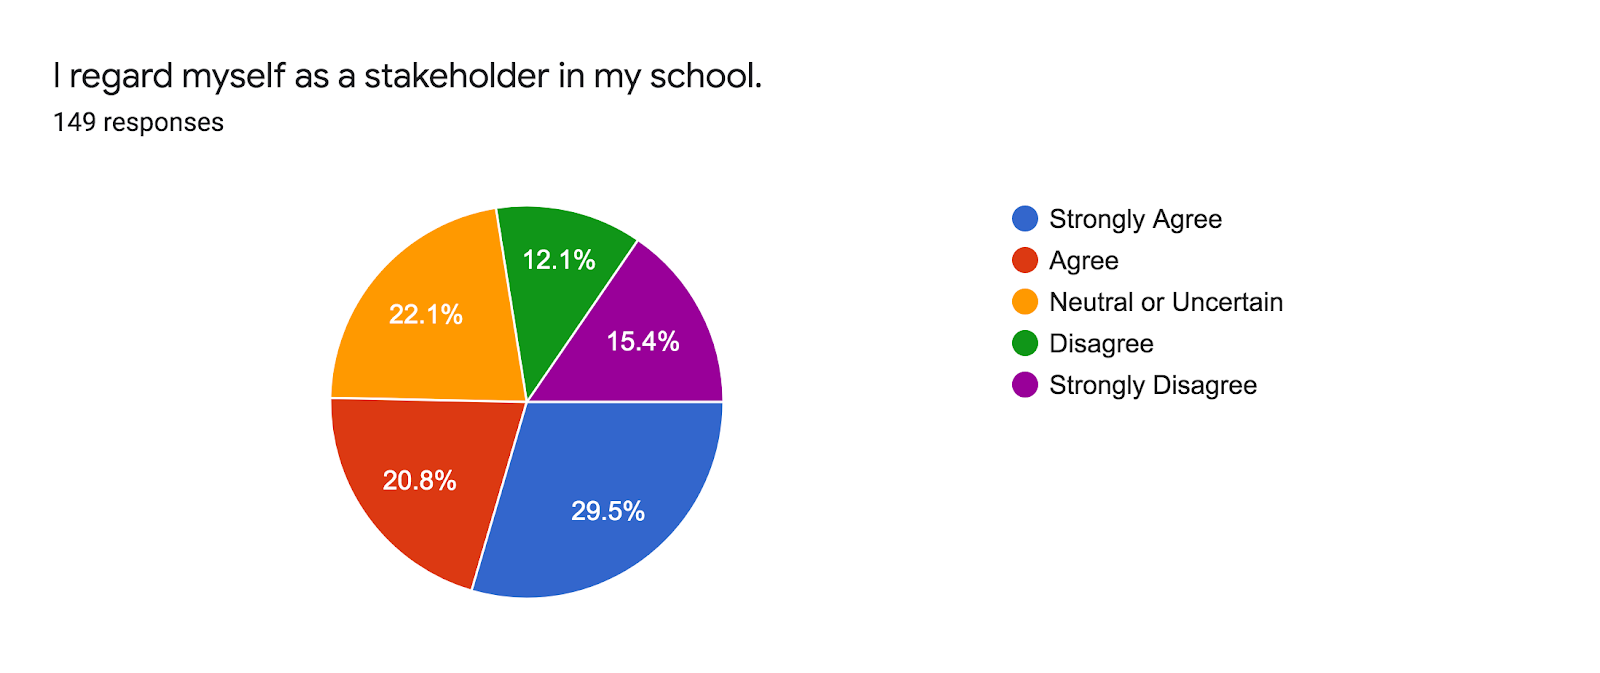 Forms response chart. Question title: I regard myself as a stakeholder in my school.. Number of responses: 149 responses.